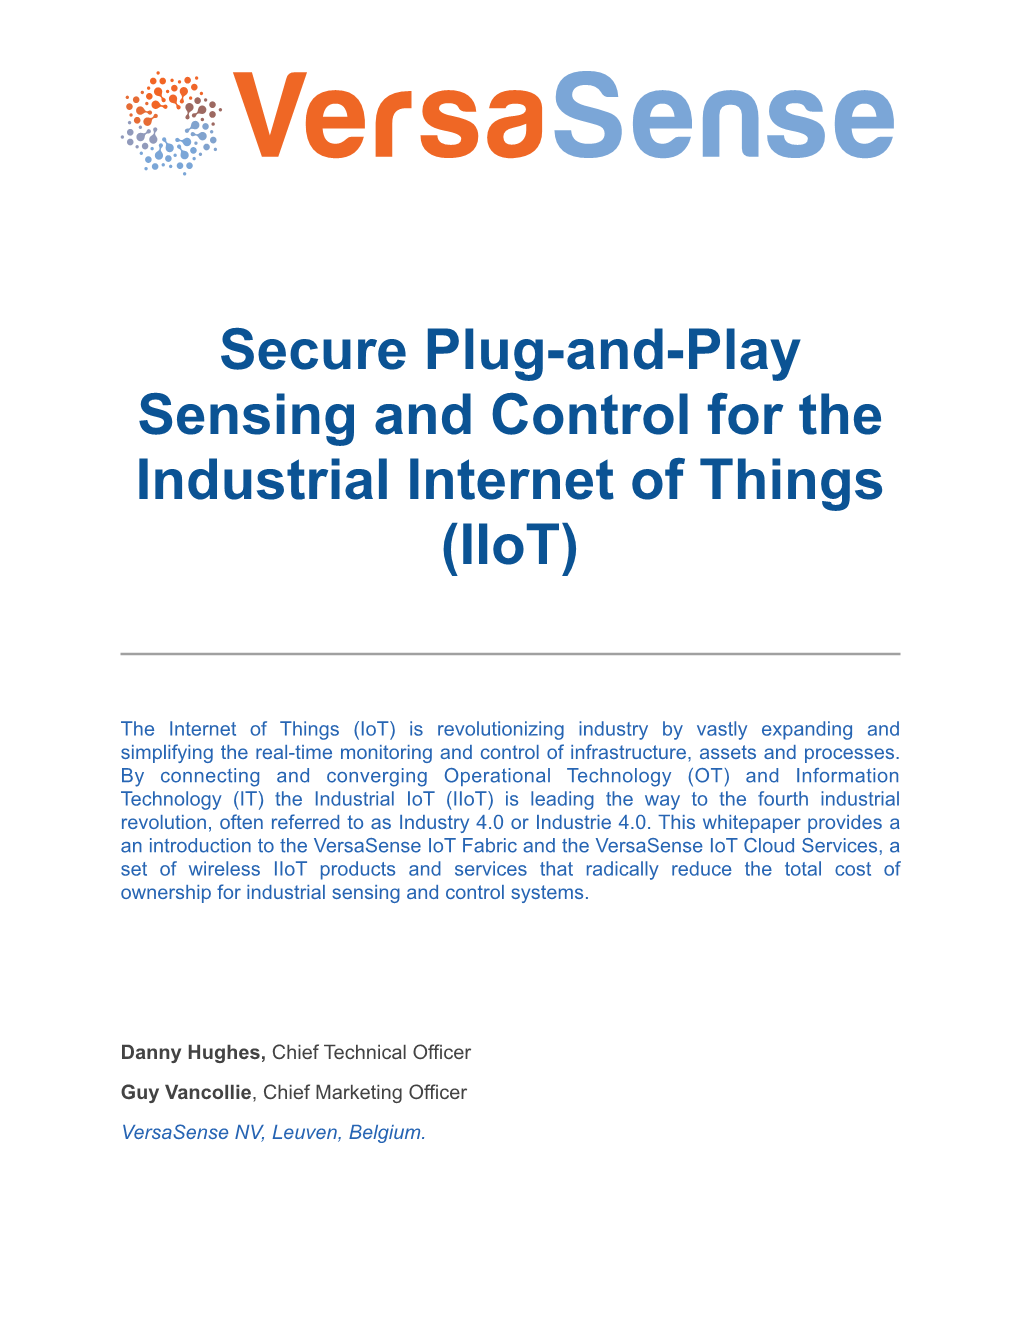 Secure Plug-And-Play Sensing and Control for the Industrial Internet of Things (Iiot)